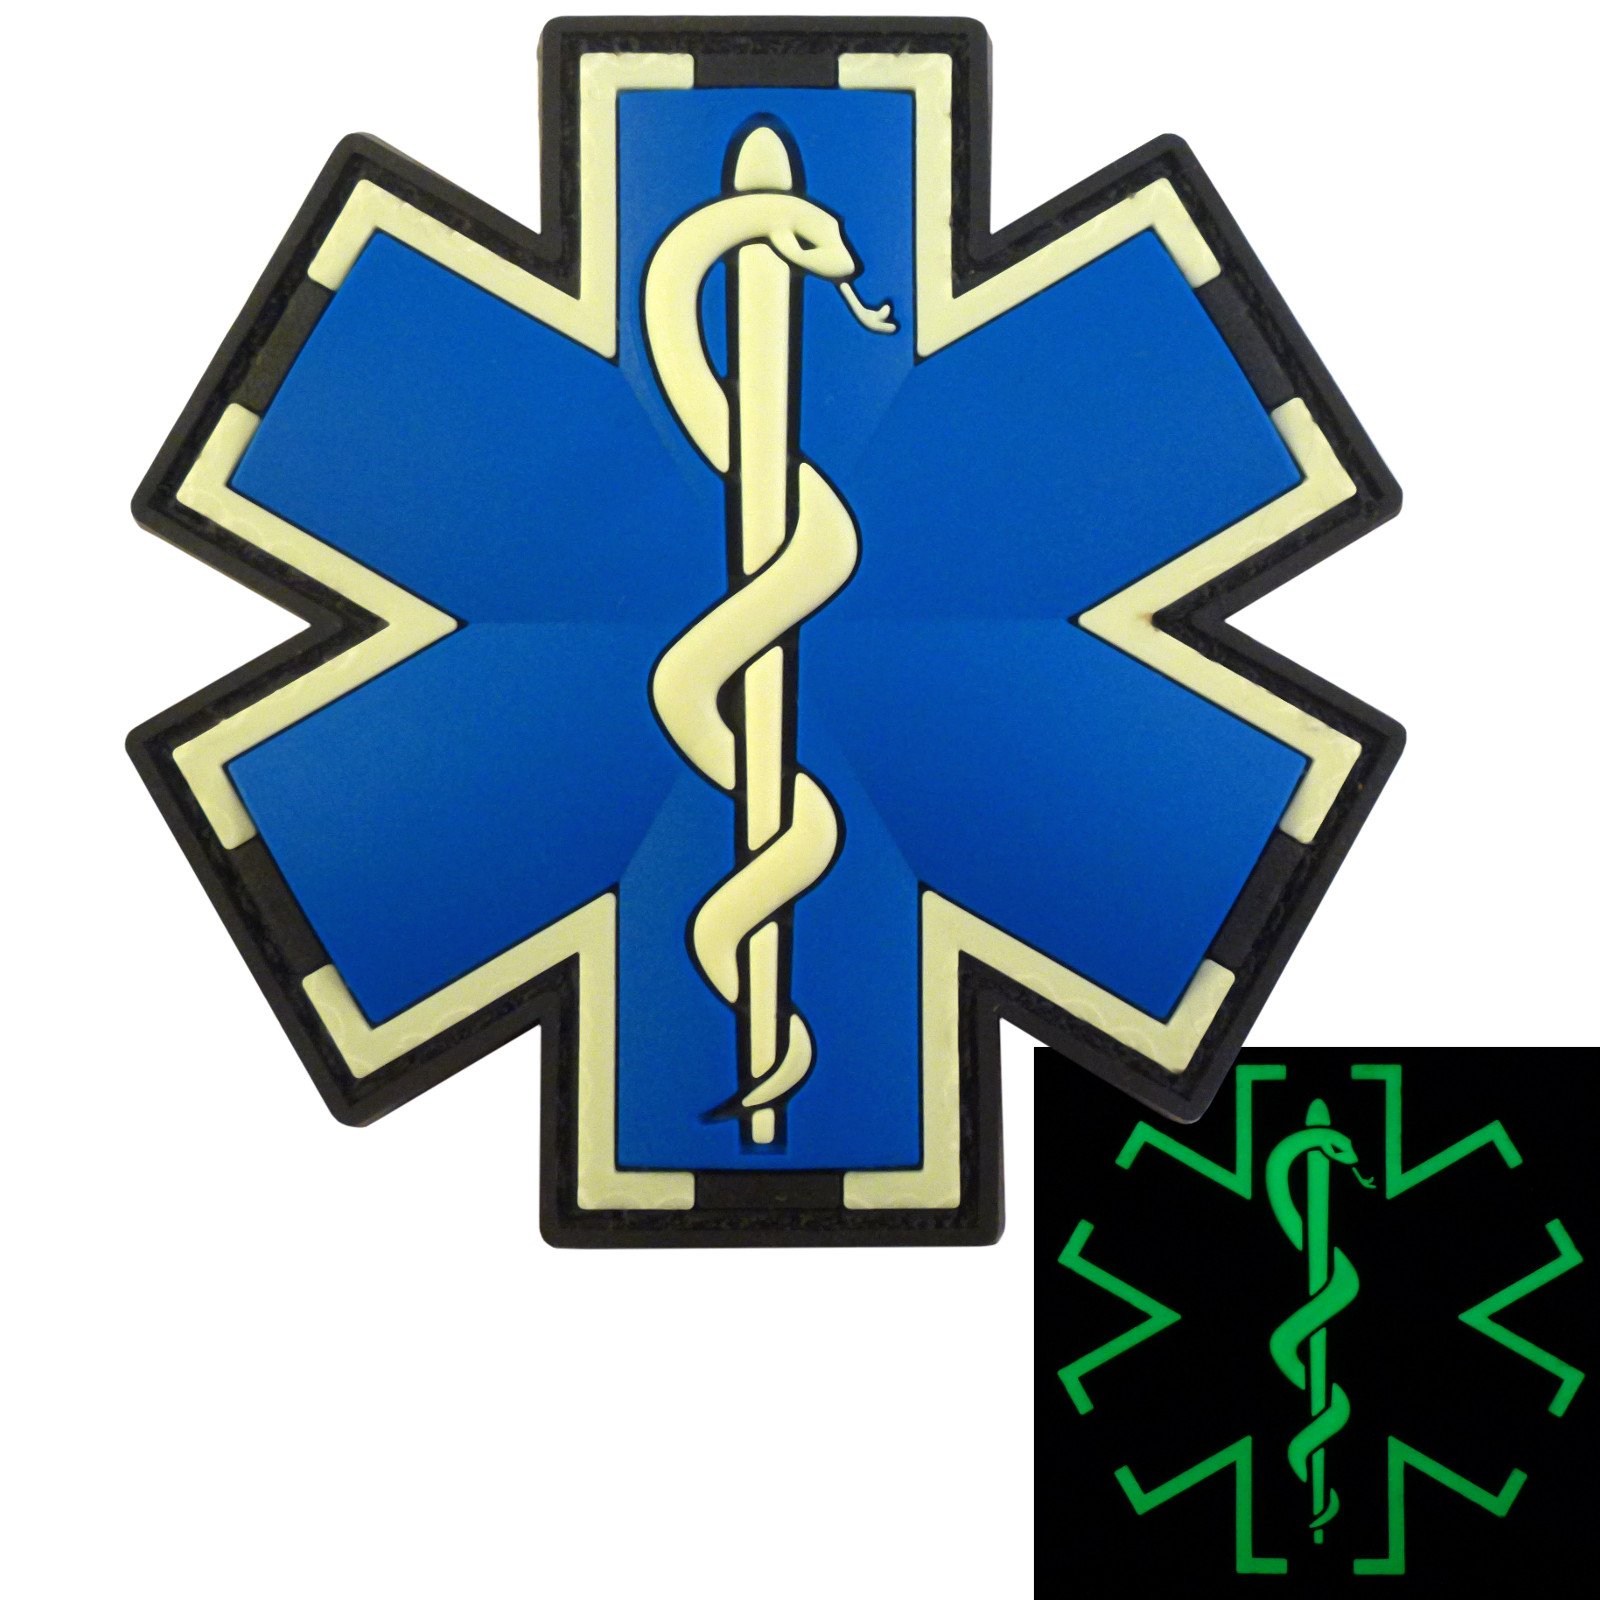 Medic Rubber 3D PVC Patch Medical Paramedic Tactical Morale Badge Patches  Hook Fasteners Backing 2.95 x 2.95 Inch Bubble of 2 Pieces